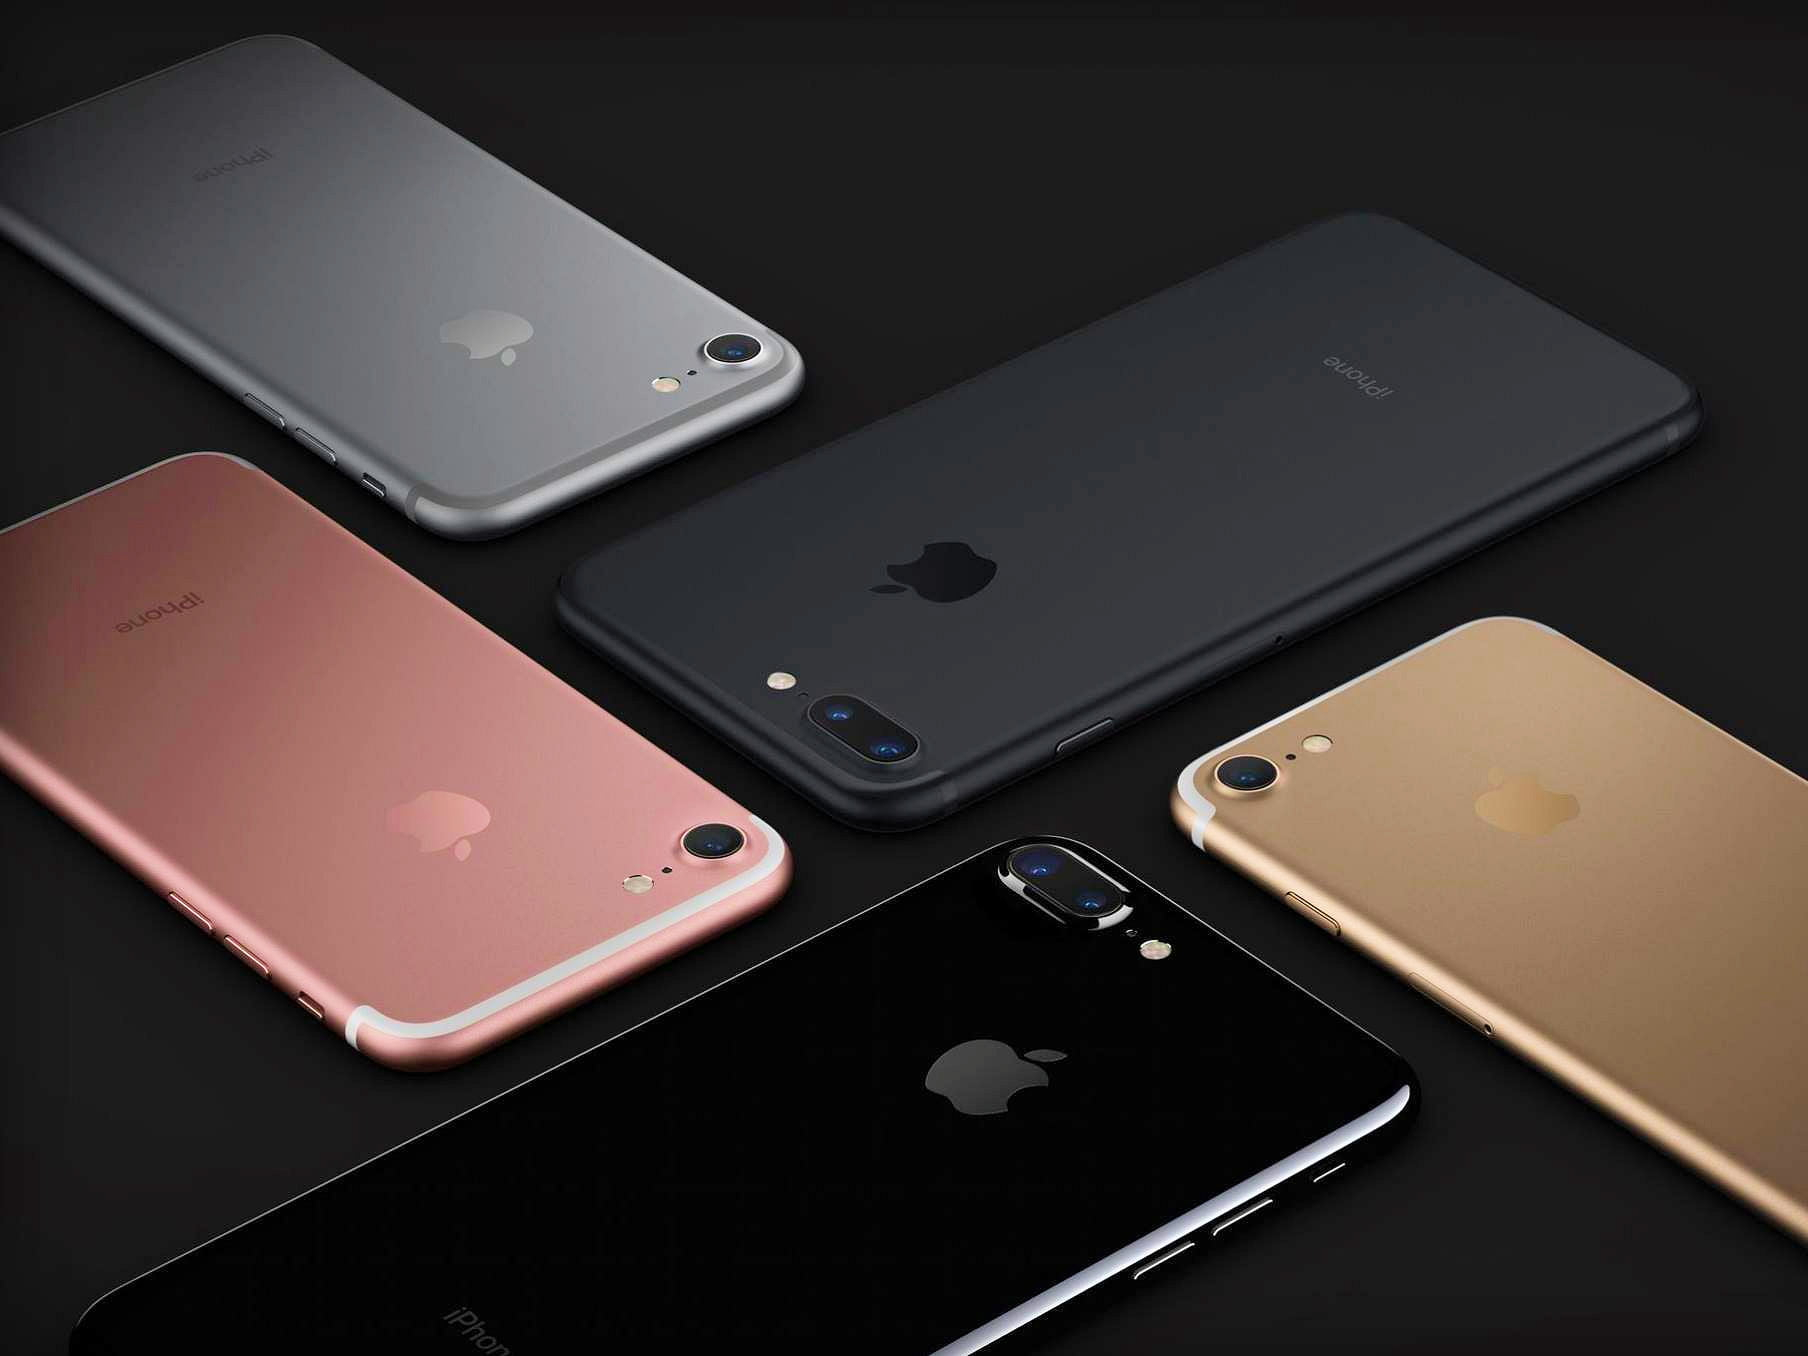 Wallpaper Five Rose Gold, Silver, Gold, Jet Black, And Black IPhone 7's -  Wallpaperforu